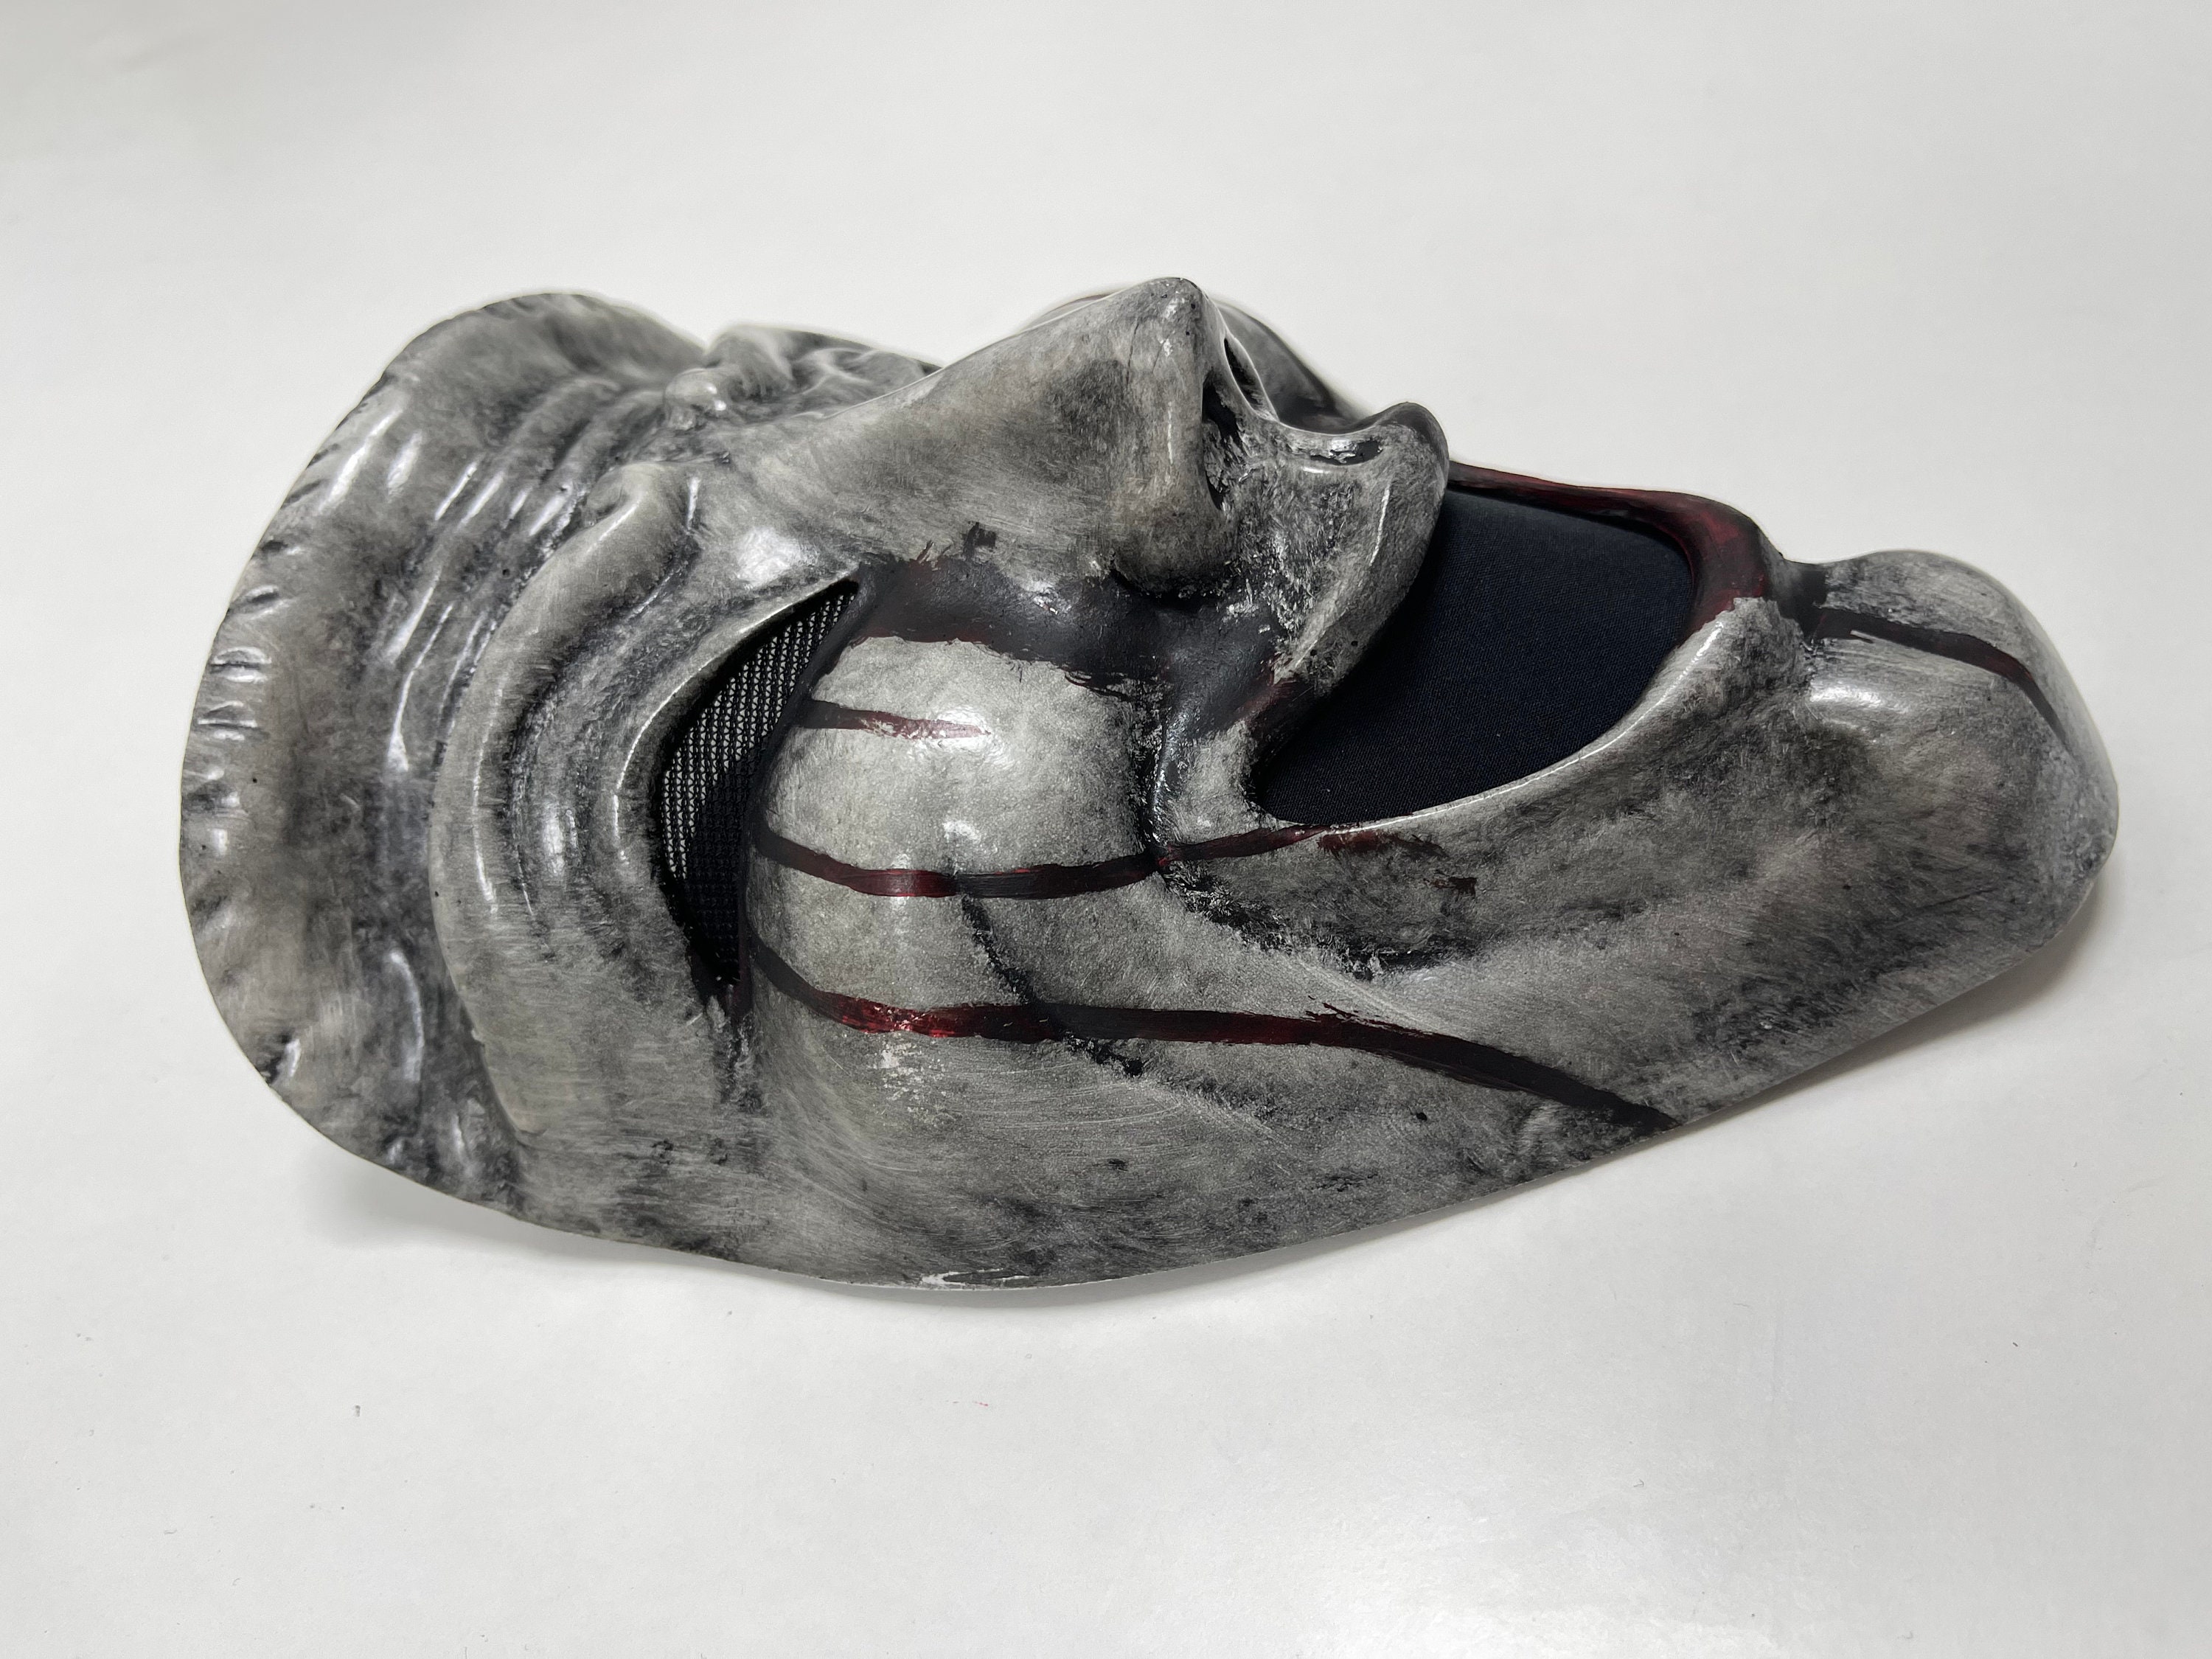 Blood Version SCP-035 Mask. Geek Comedy Mask. Own Mask -  Israel